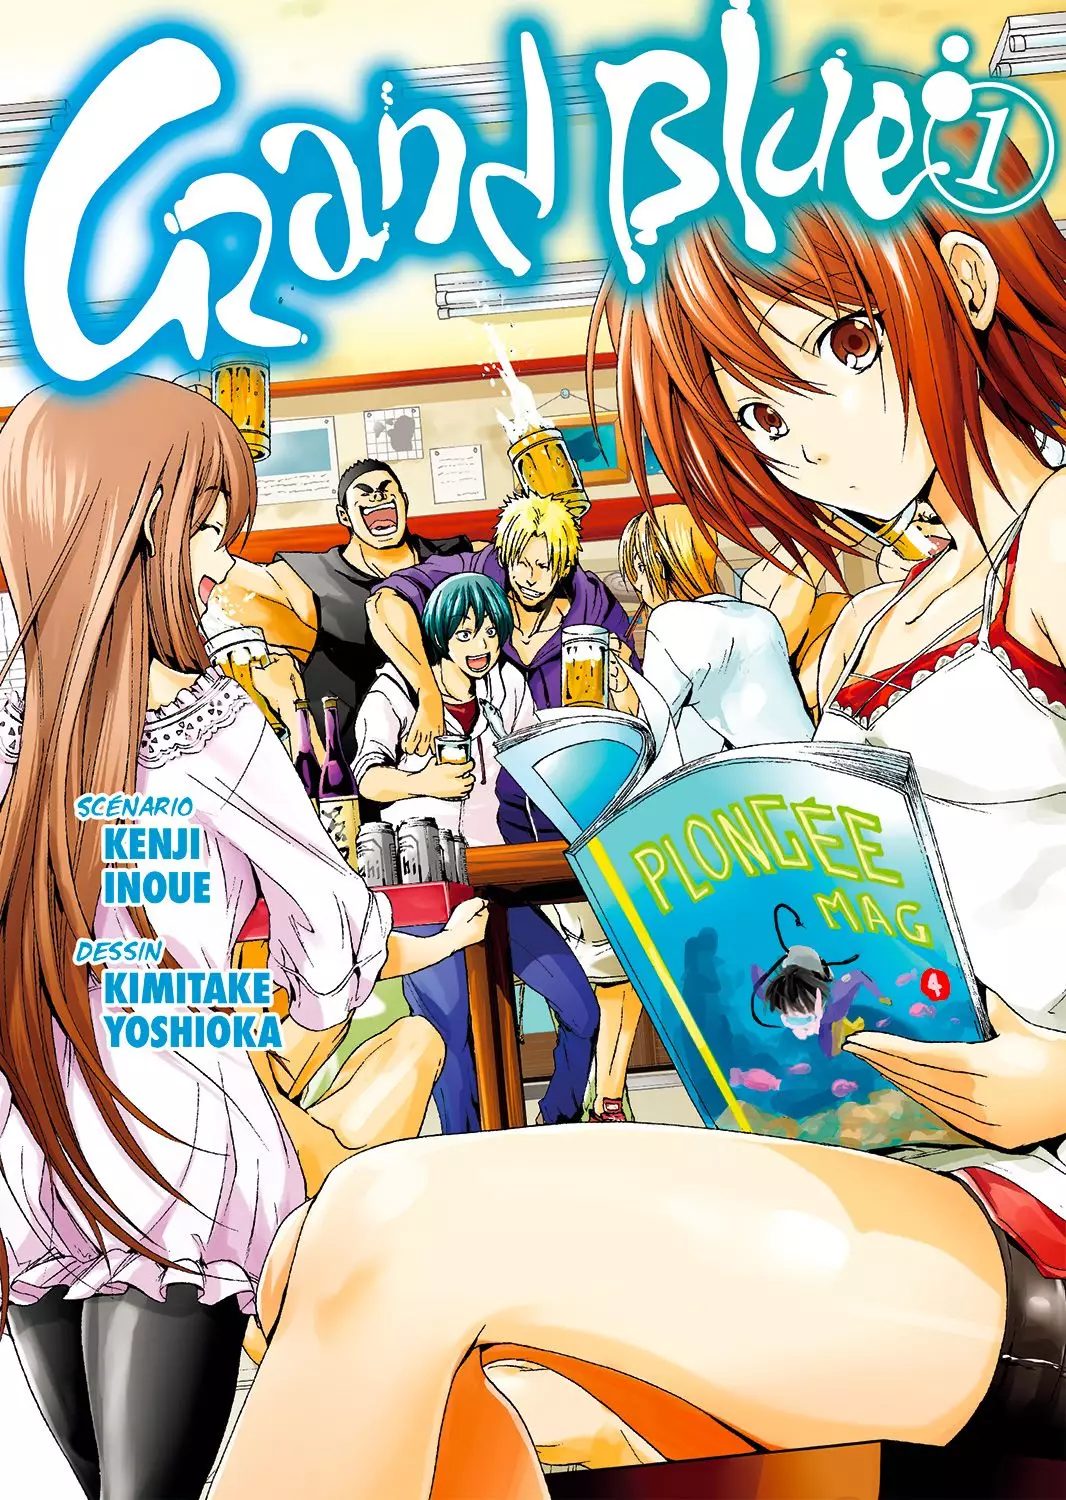 Grand blue personnage